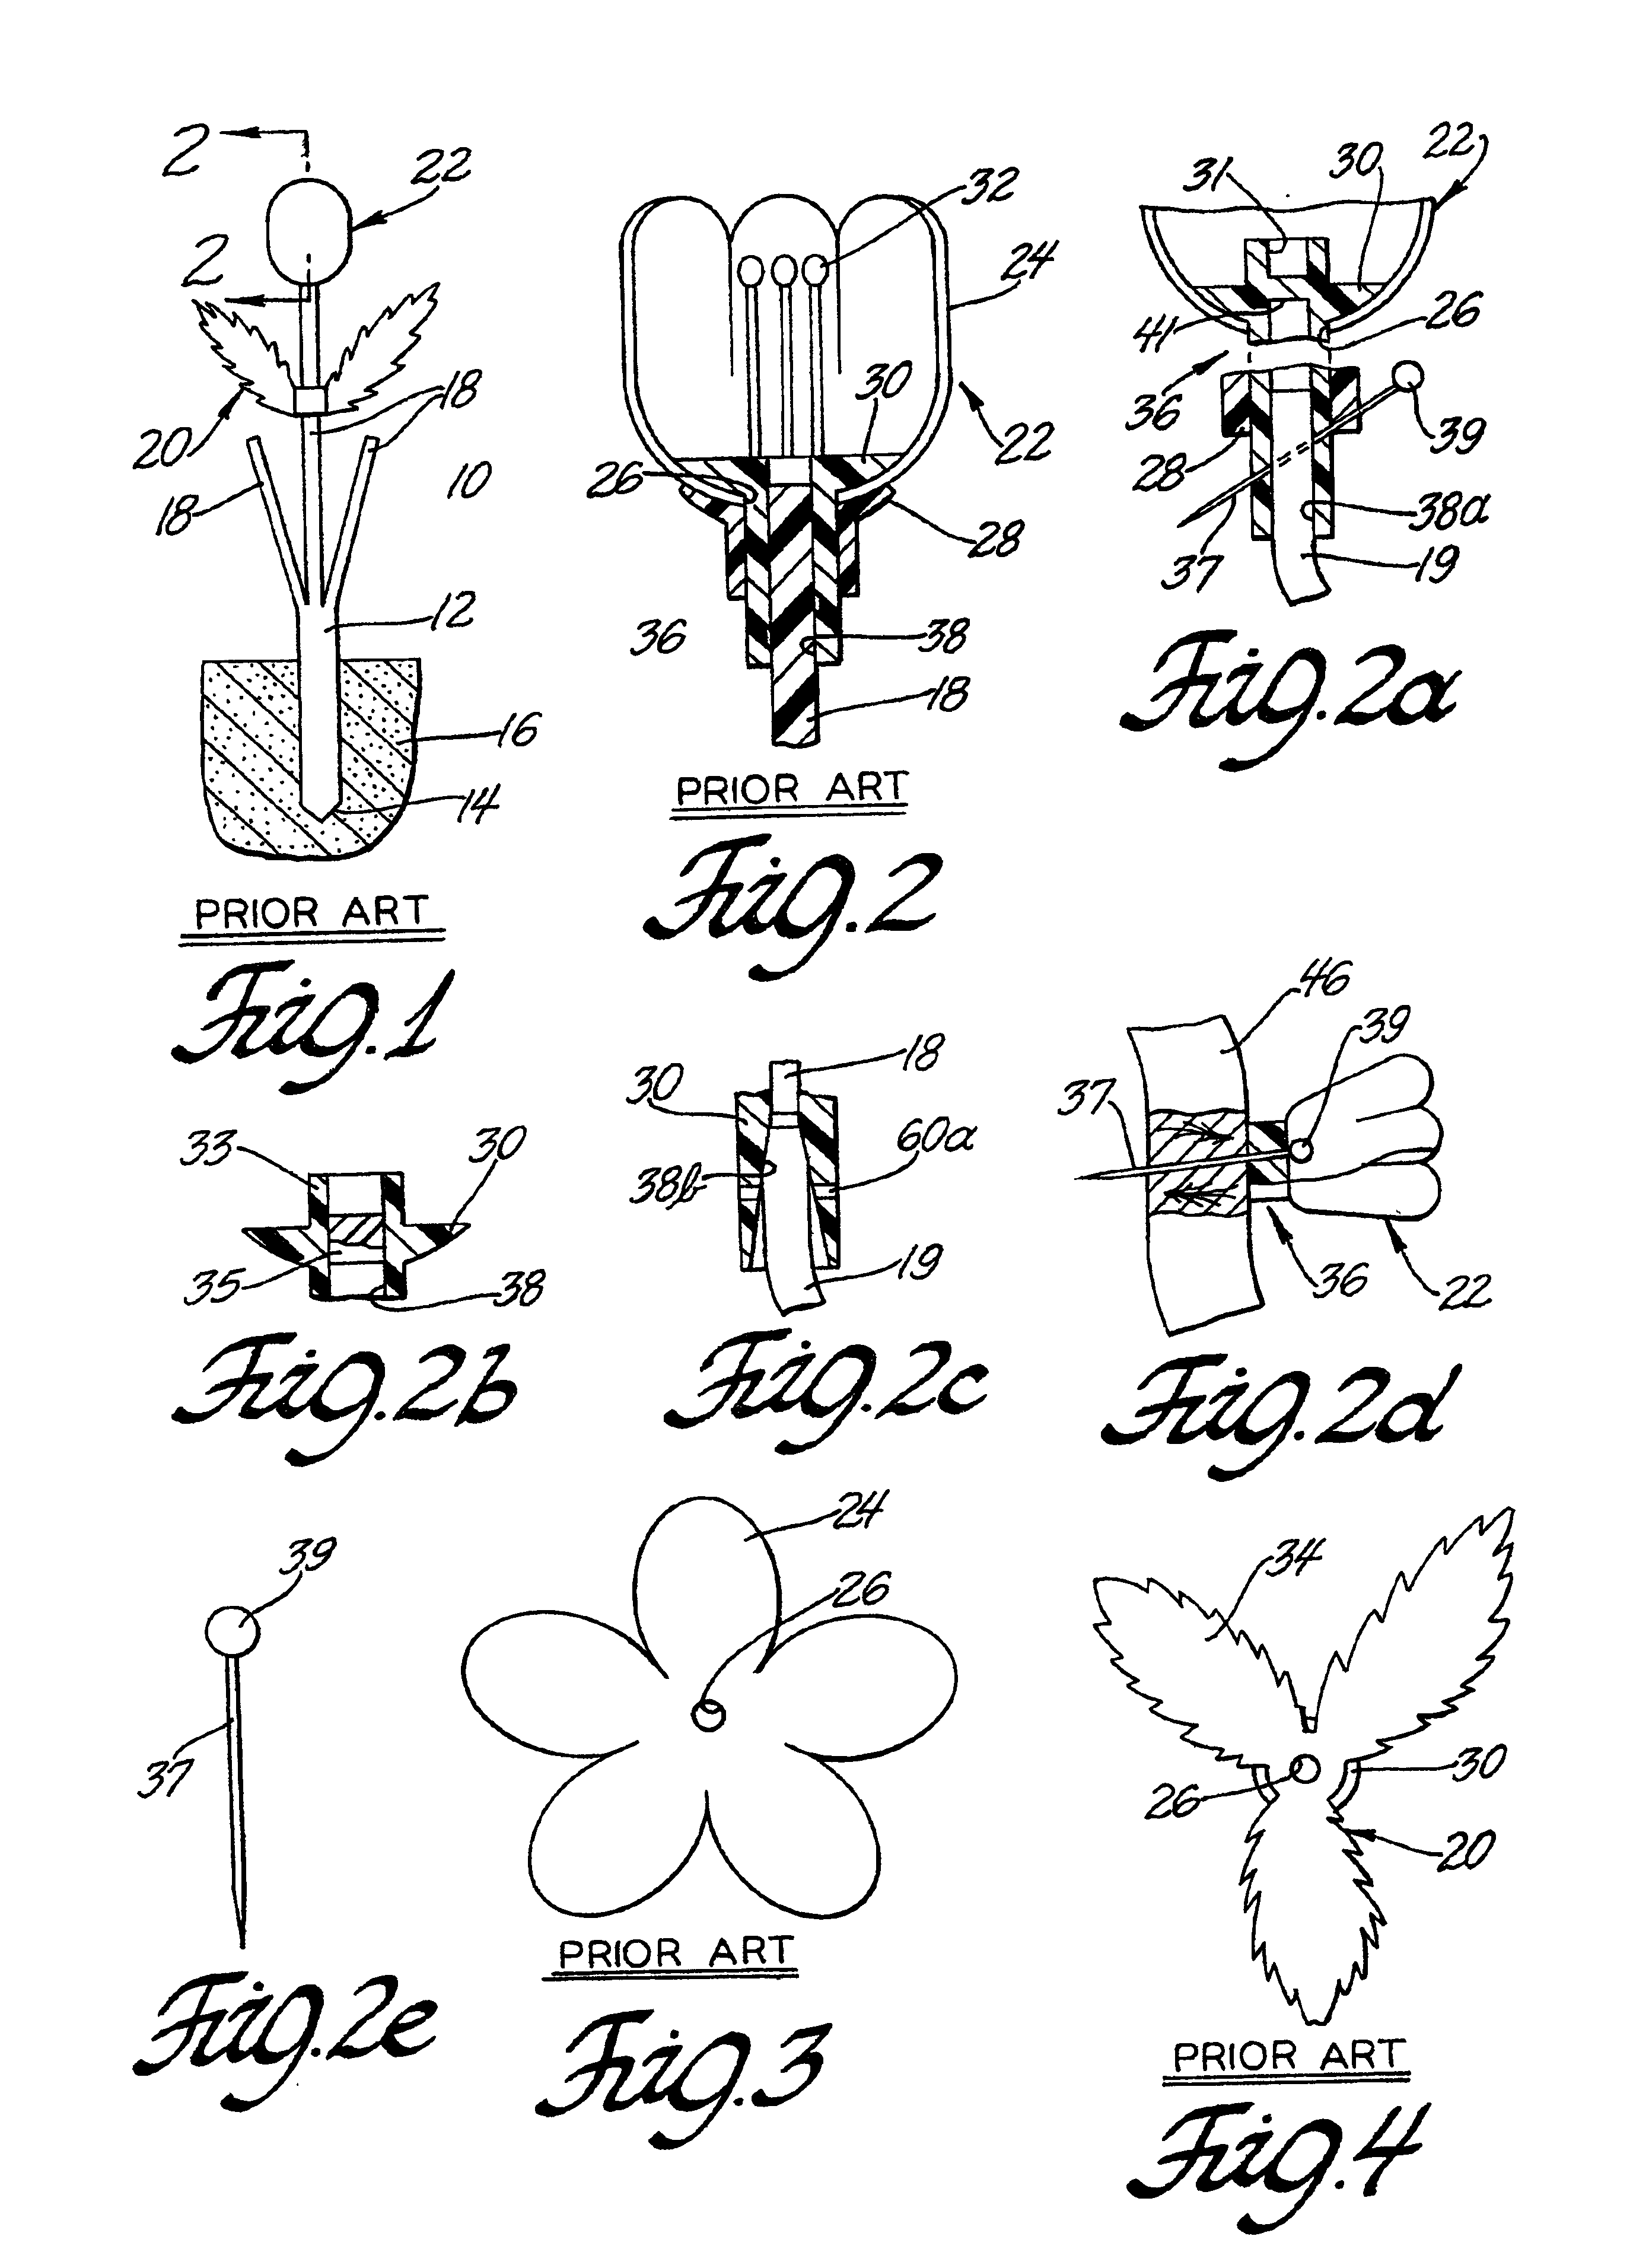 Method, apparatus and kit for attaching artificial flowers to non-blooming live vegetation to simulate blooming thereof